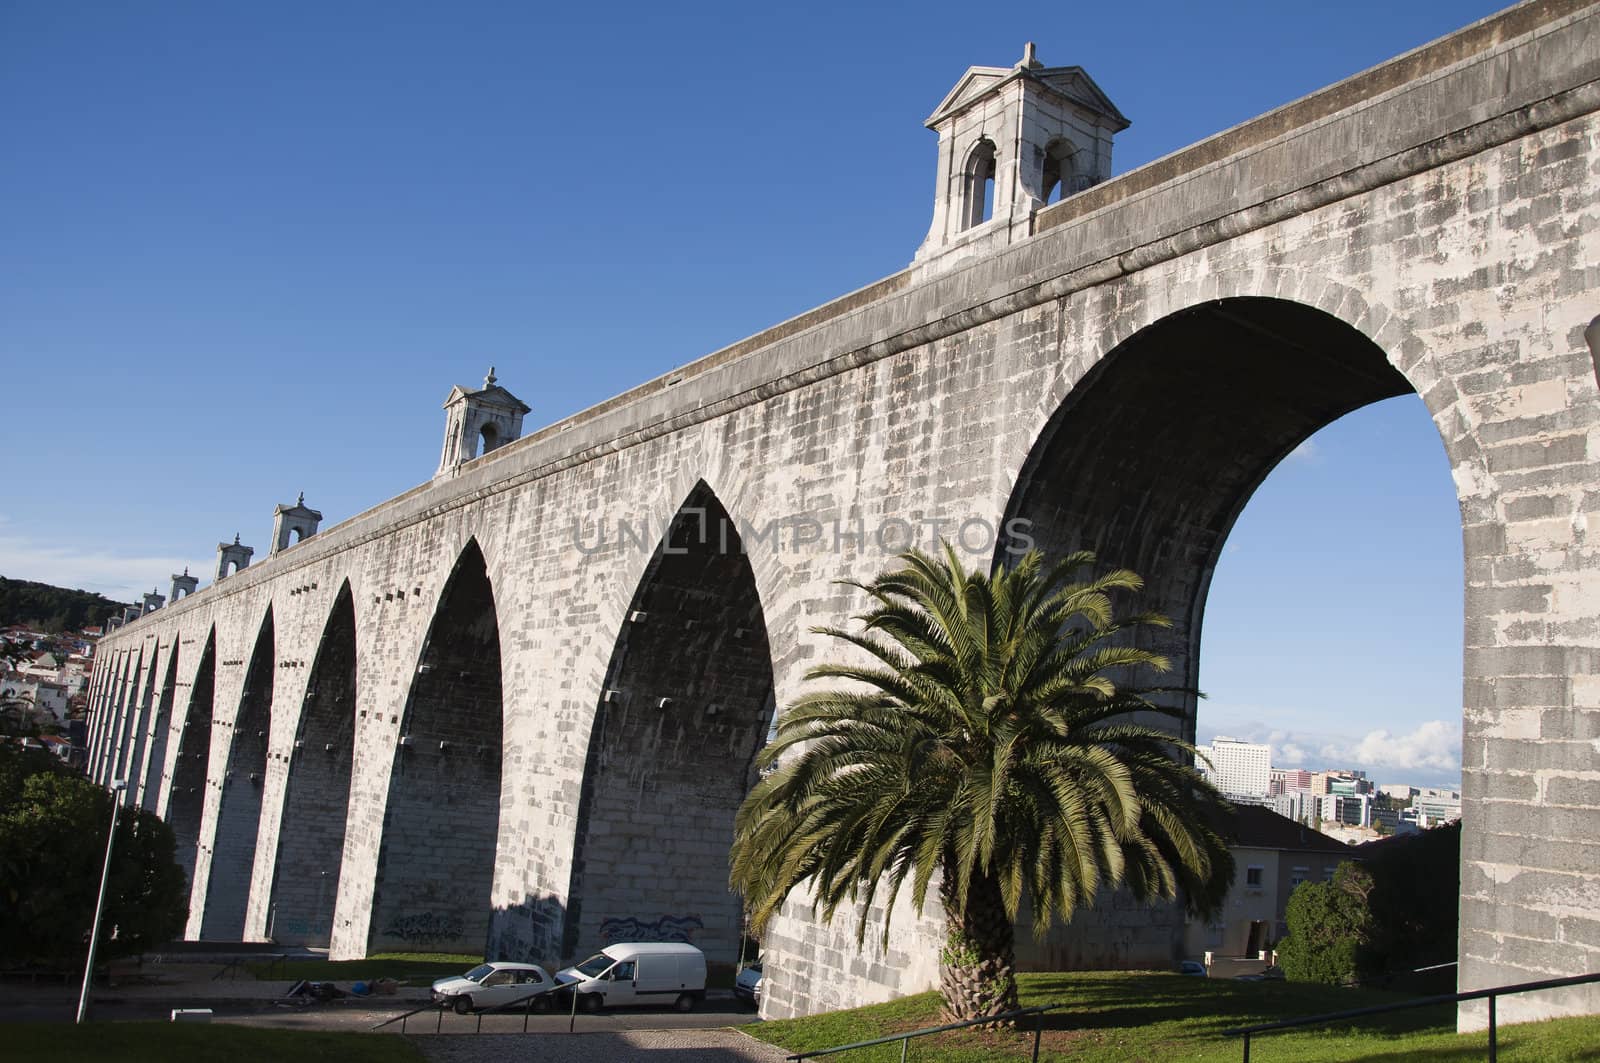 The historic arch was built in 1748, Straitelstvo ARC was during the reign of Juan fifth, it is considered a masterpiece of engineering of the Baroque period